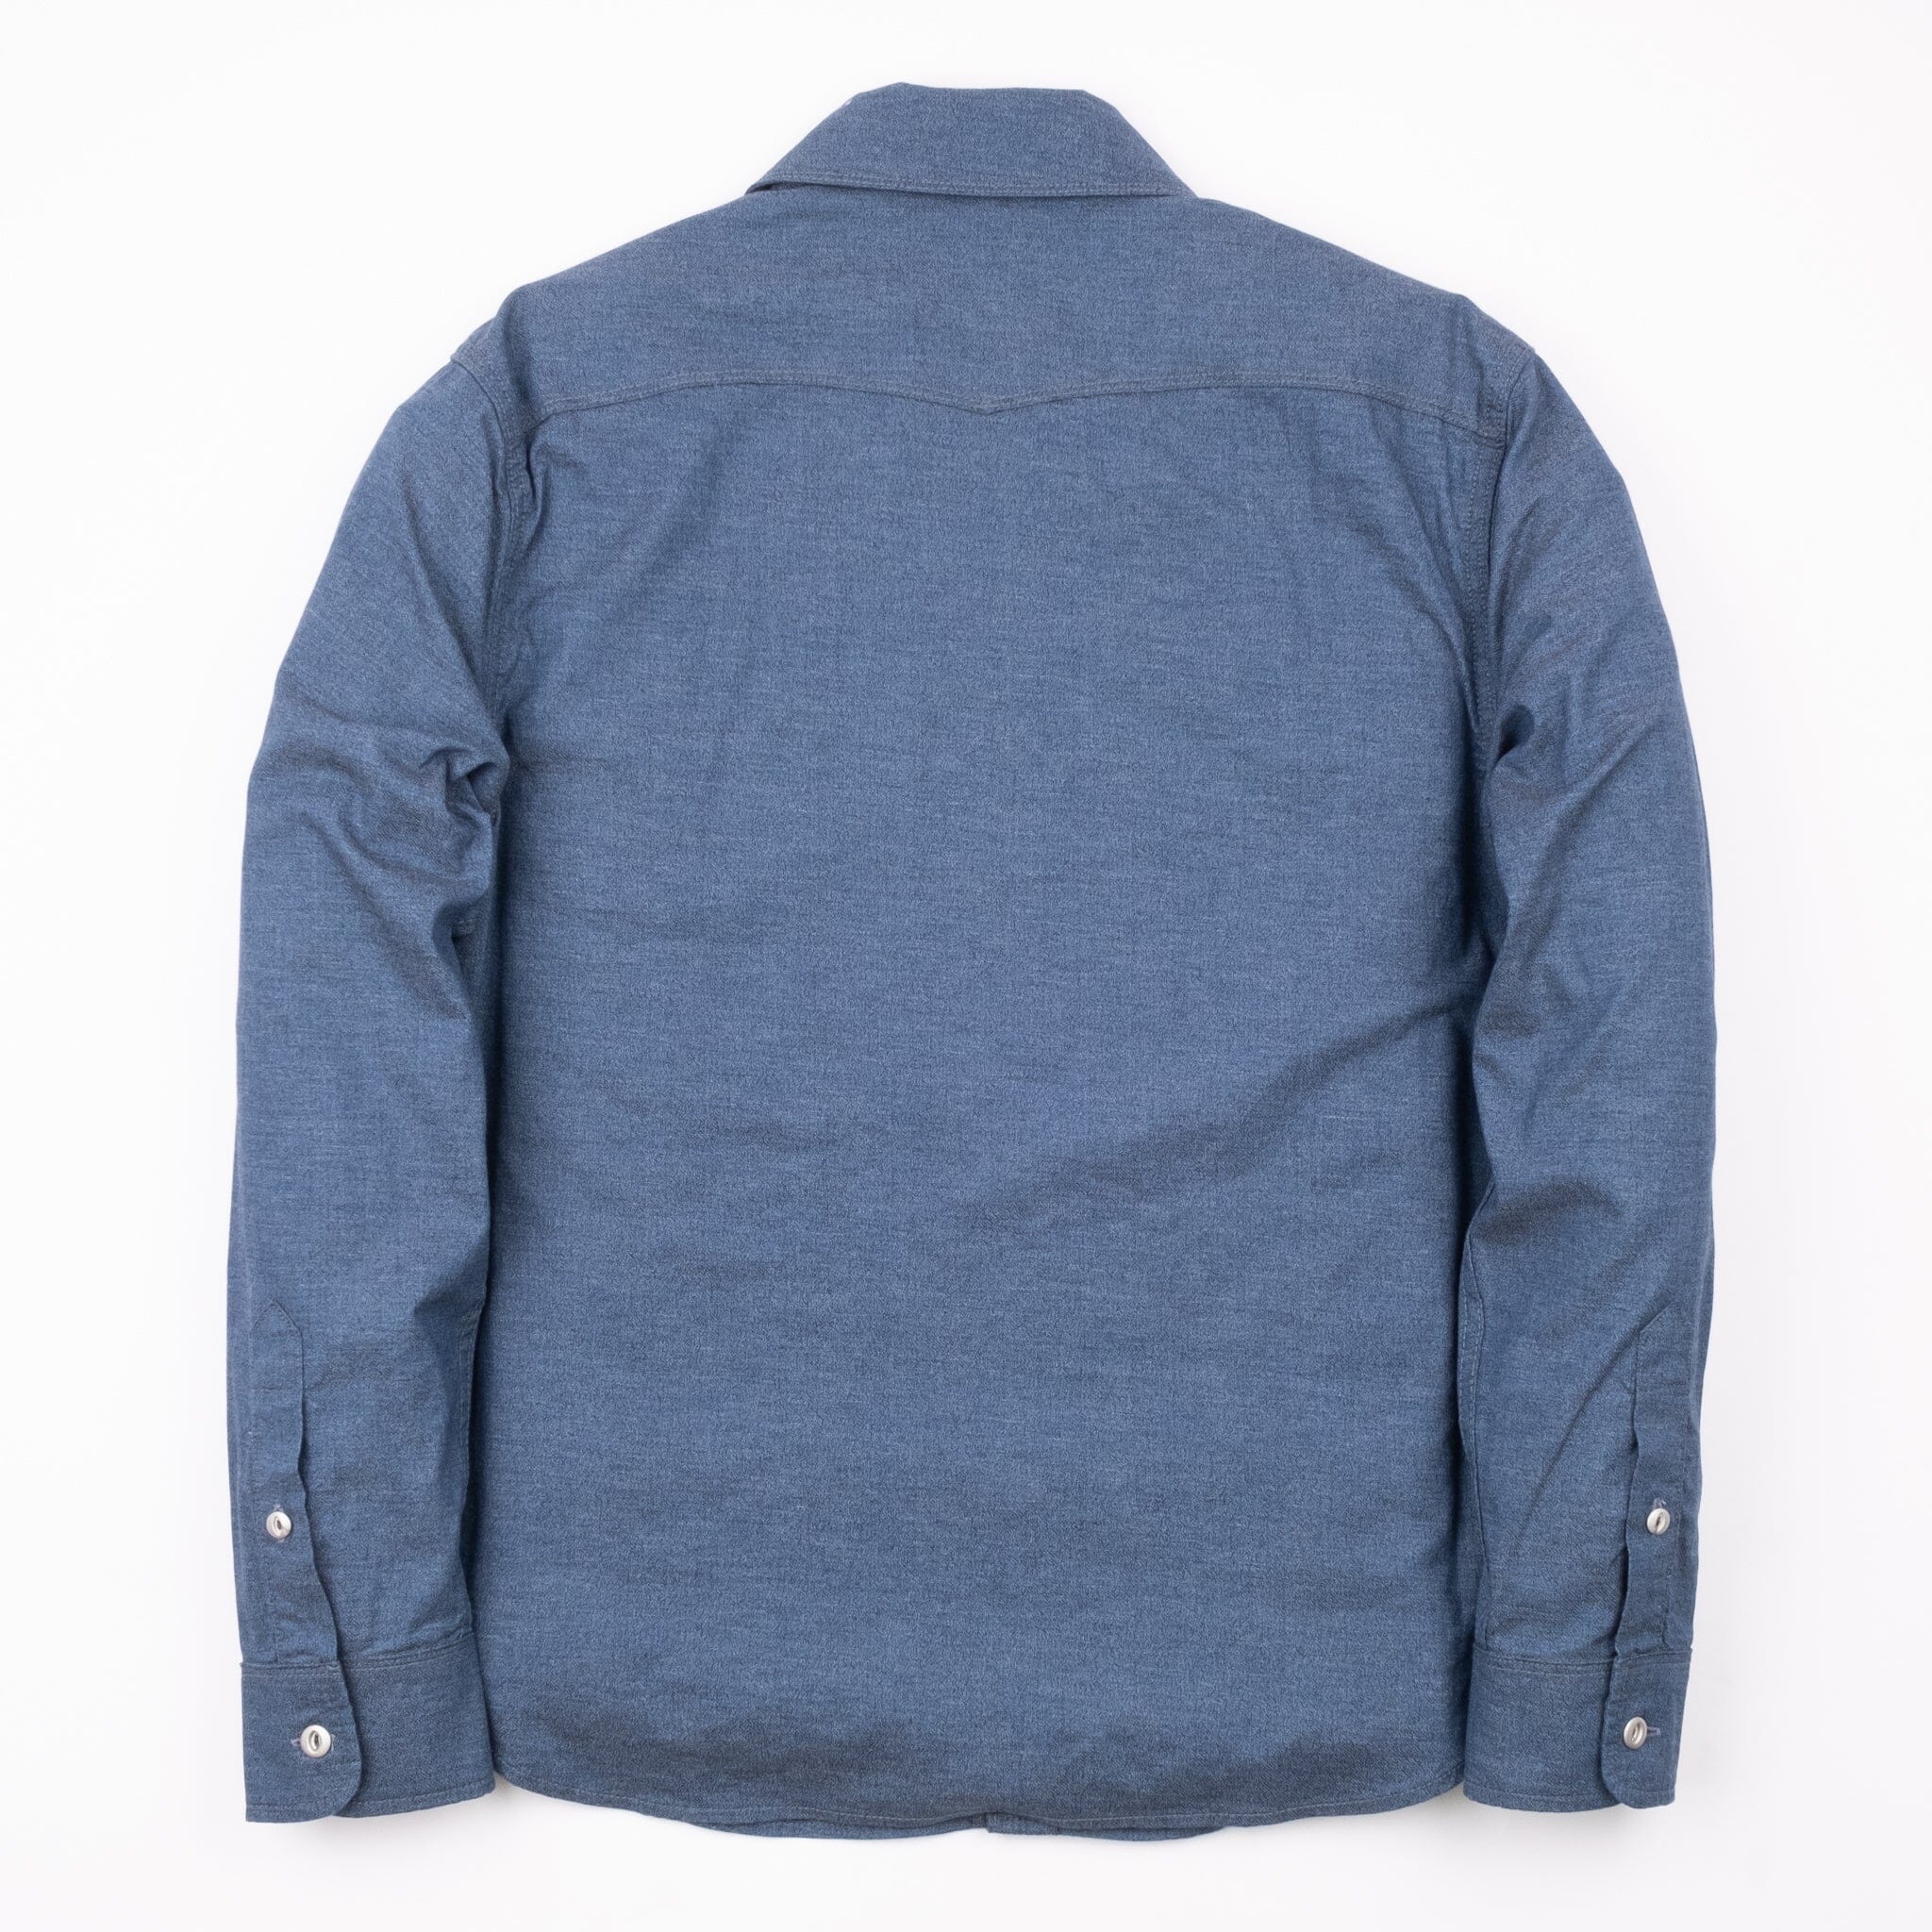 Freenote Cloth - Scout Chambray - City Workshop Men's Supply Co.